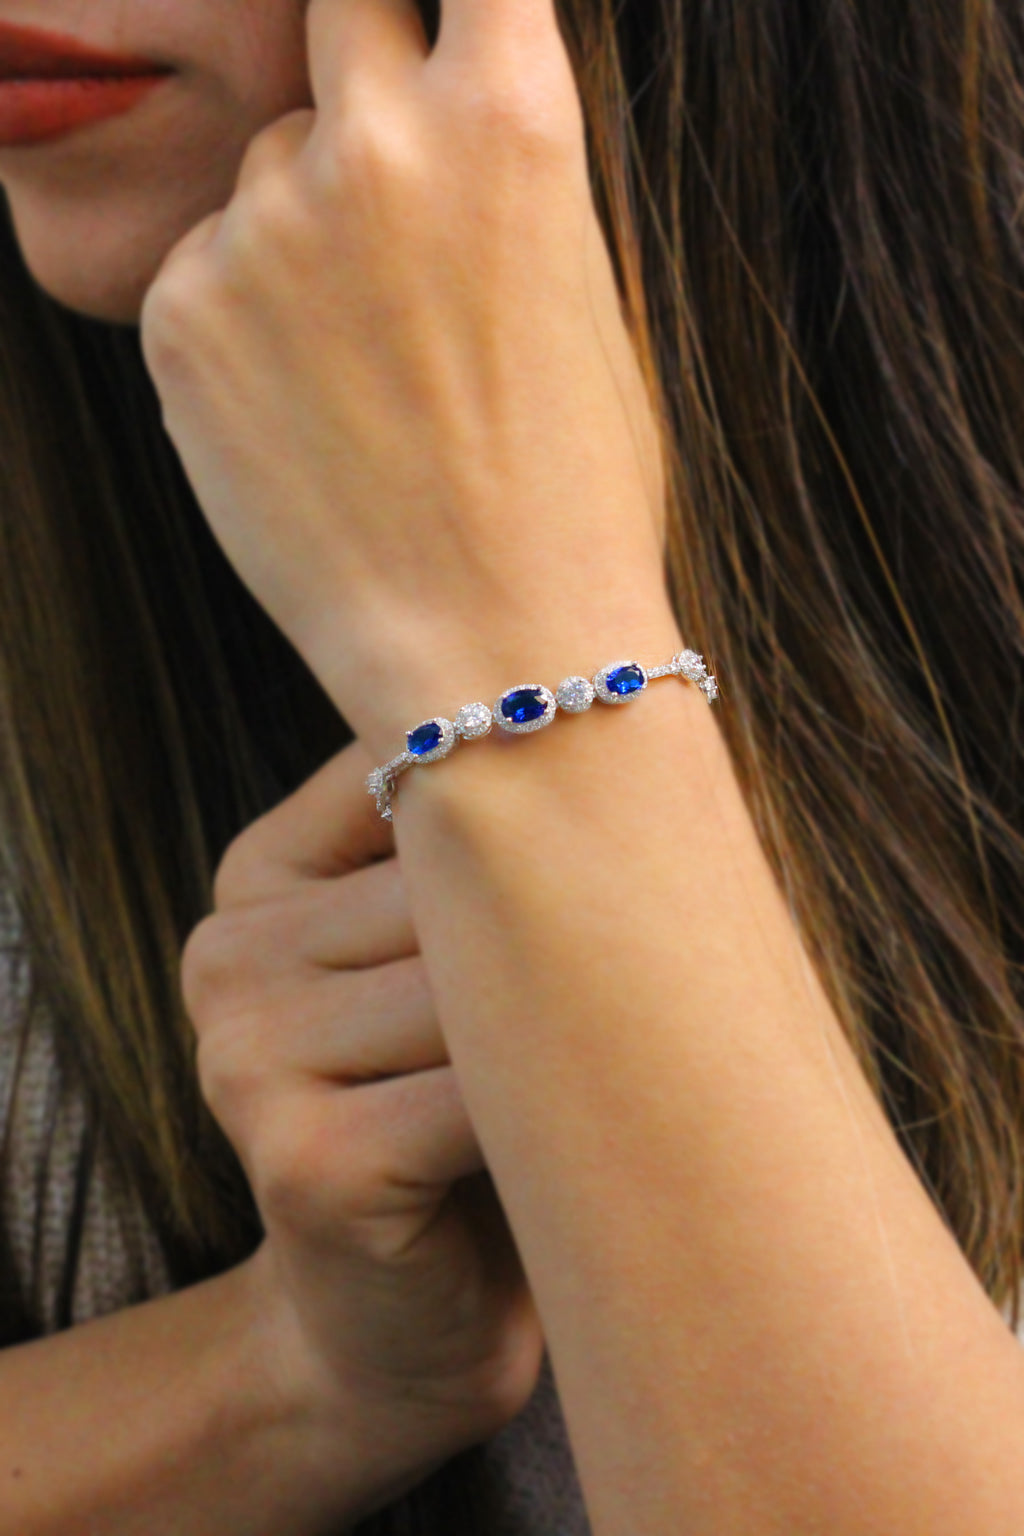 Authentic Handmade Silver Bracelet With Sapphire and Zircon (NG201015200)